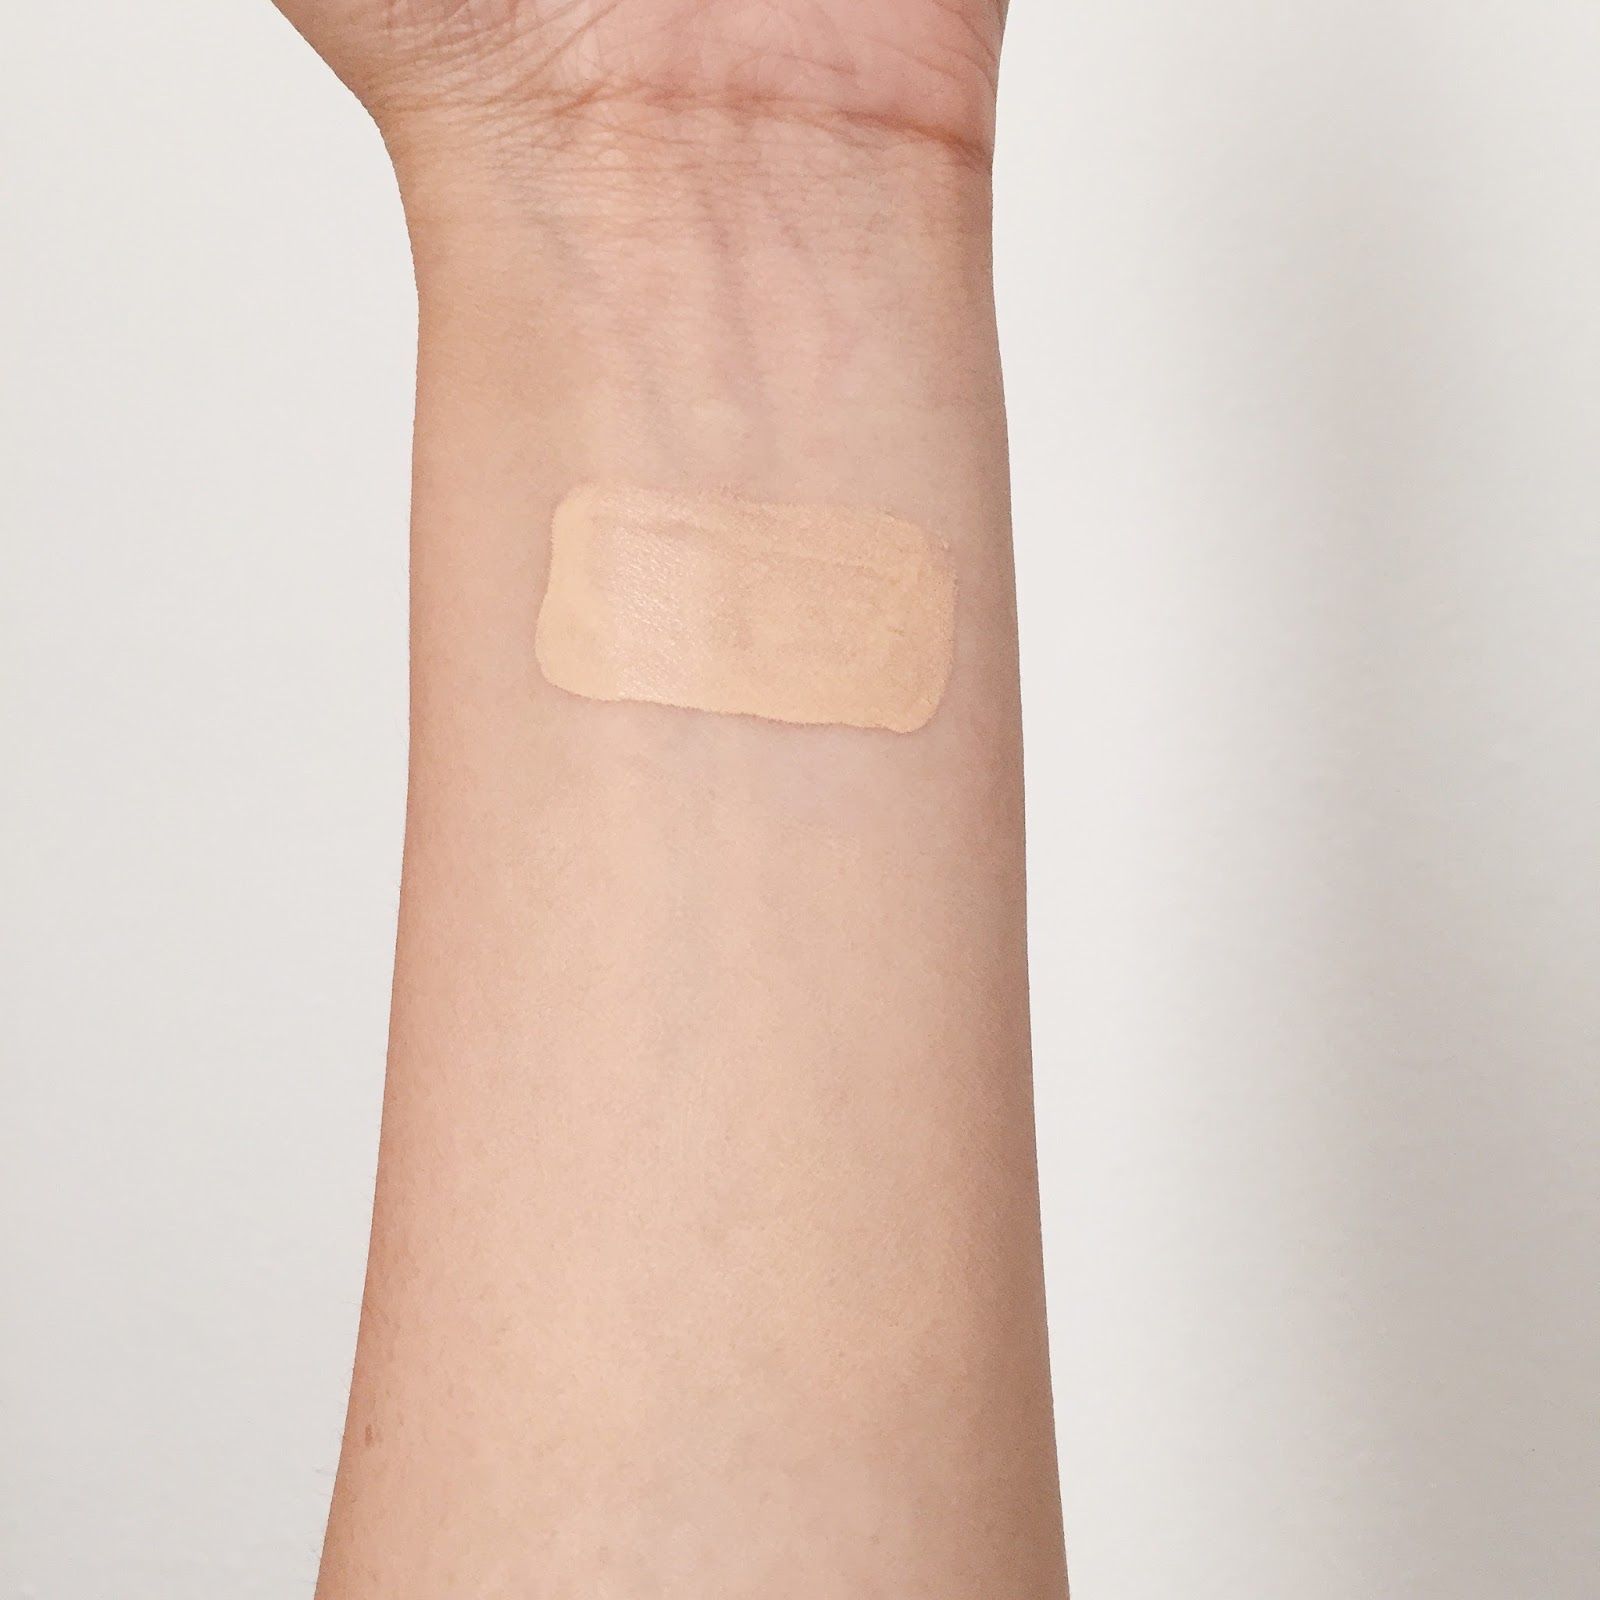 100% pure 2nd skin foundation review swatch